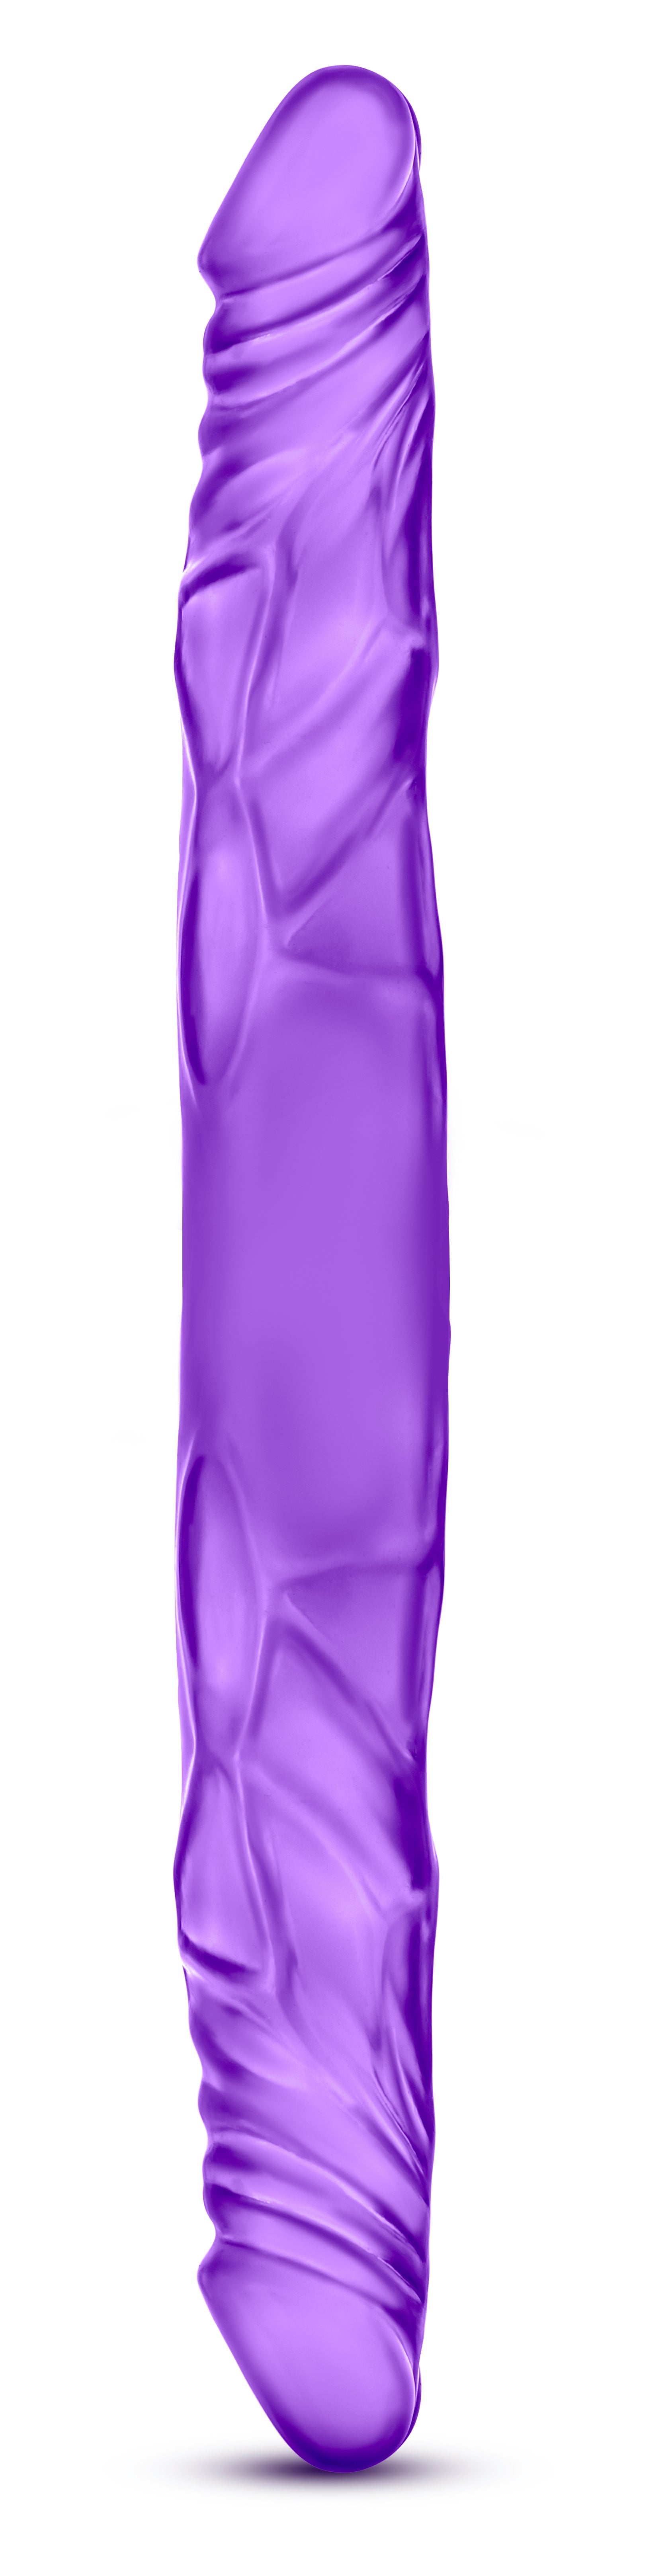 B Yours 14 Inch Double Dildo - Purple BL-29751